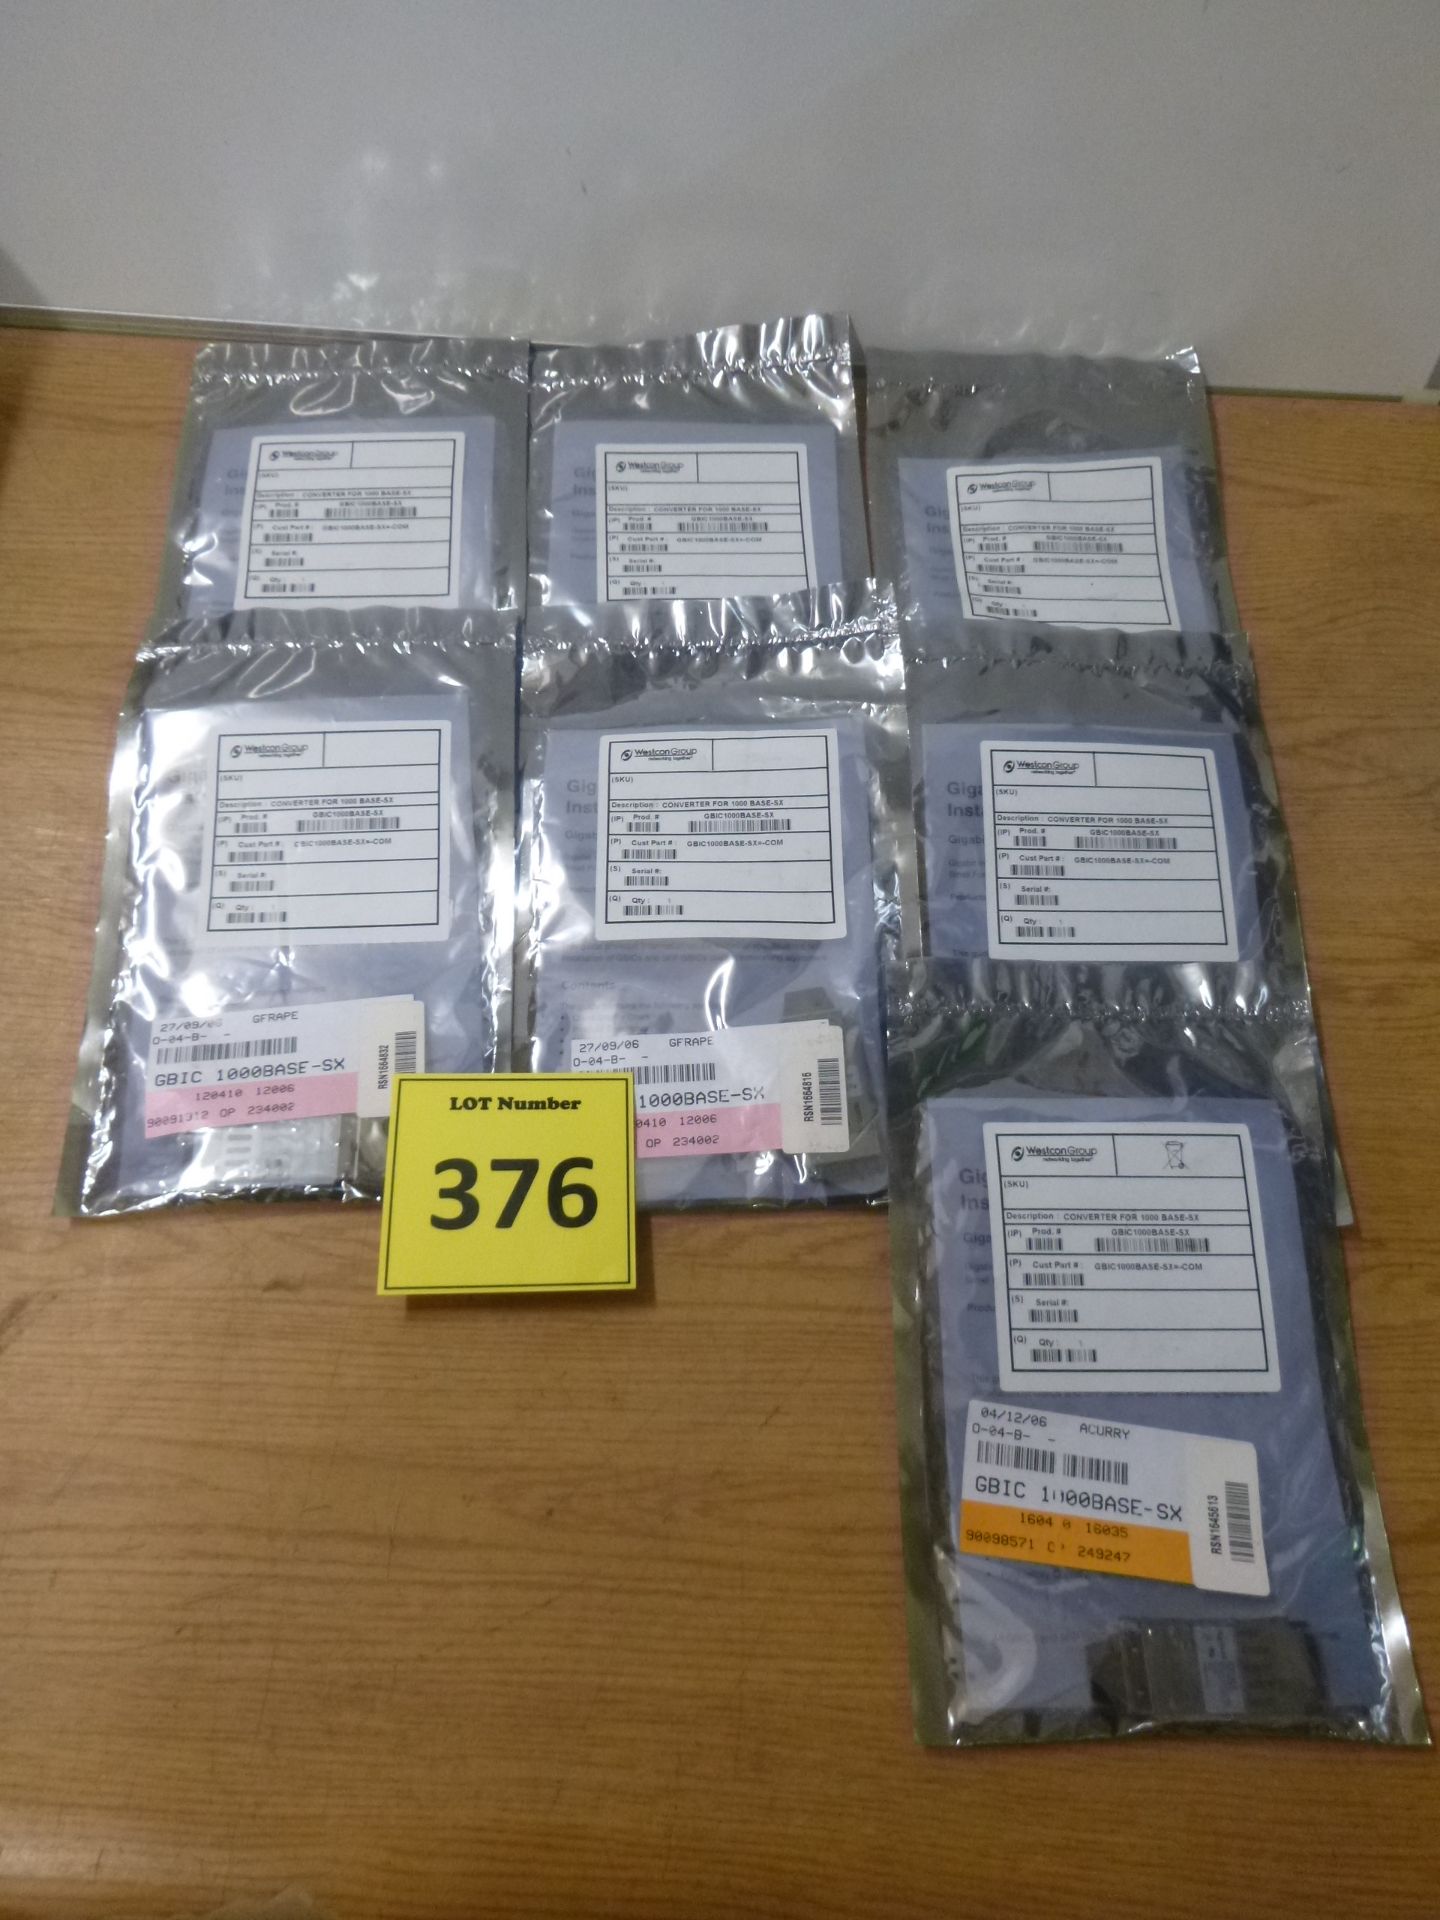 7 X NEW WESTCON GROUP CONVERTERS FOR 1000 BASE-SX. GBIC1000 BASE-SX